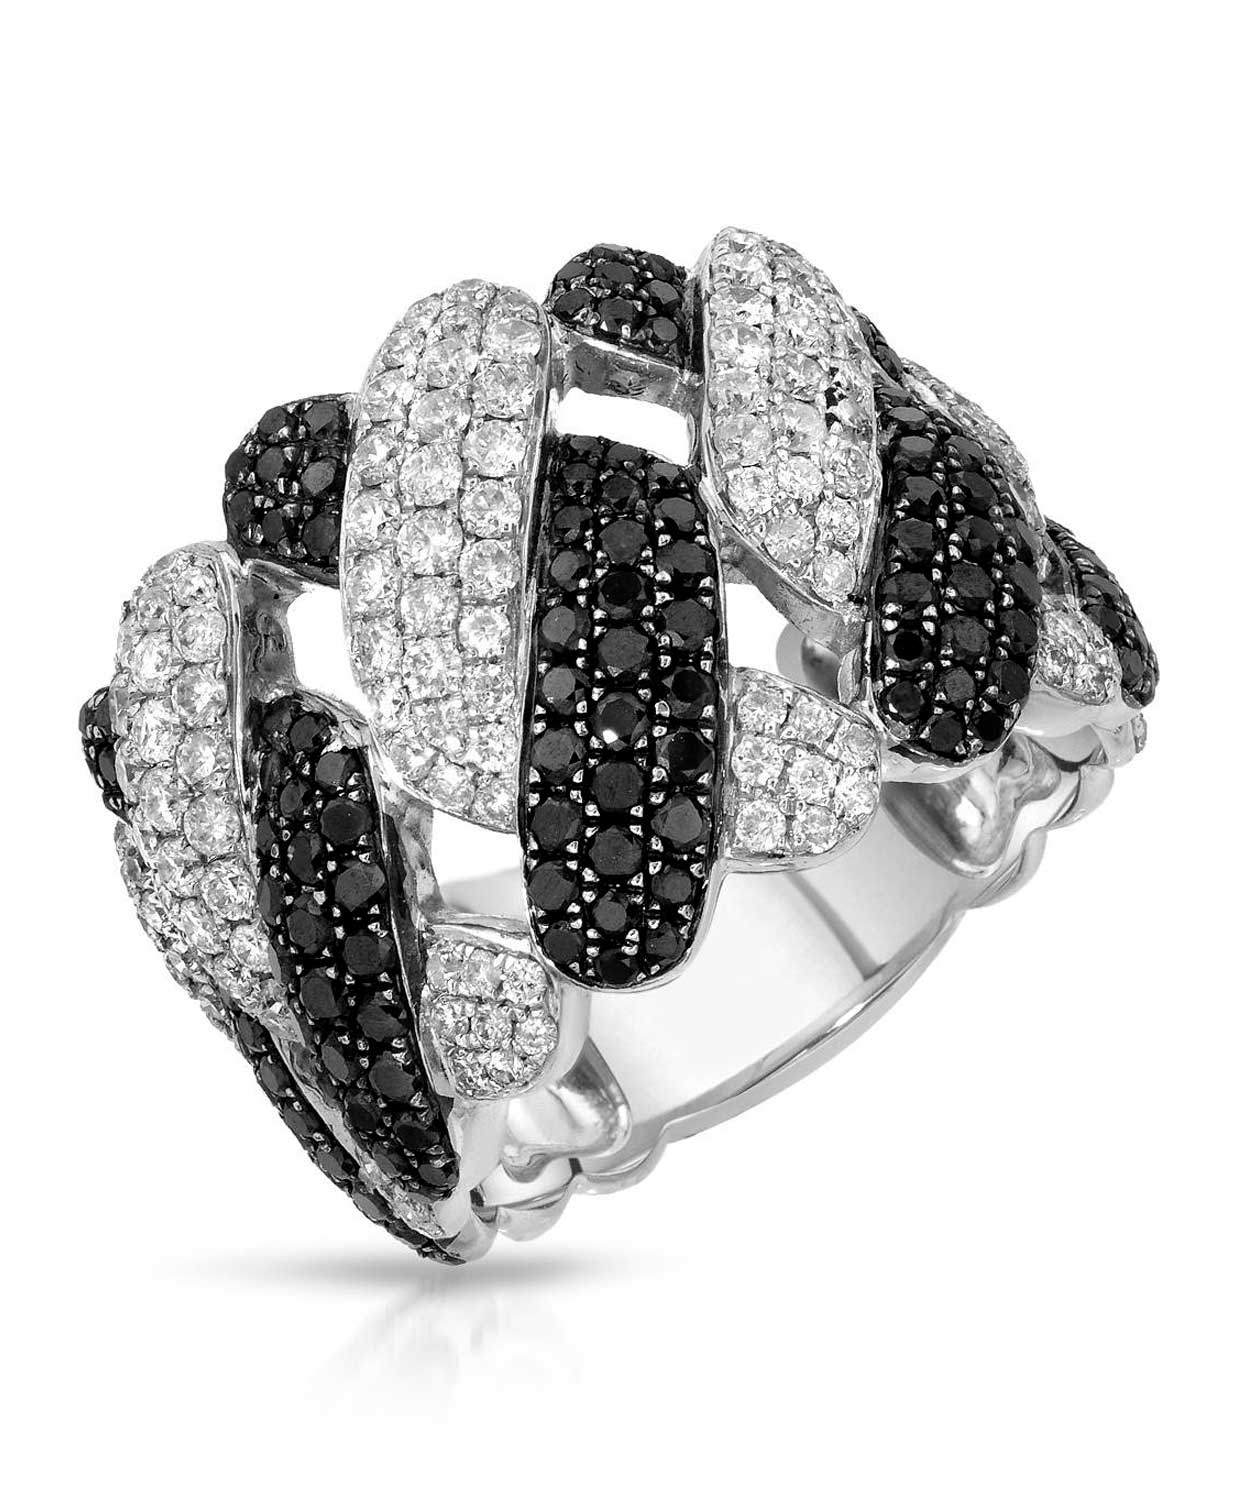 Black & White Collection 2.30 ctw Diamond 14k White Gold Intertwined Ring View 1